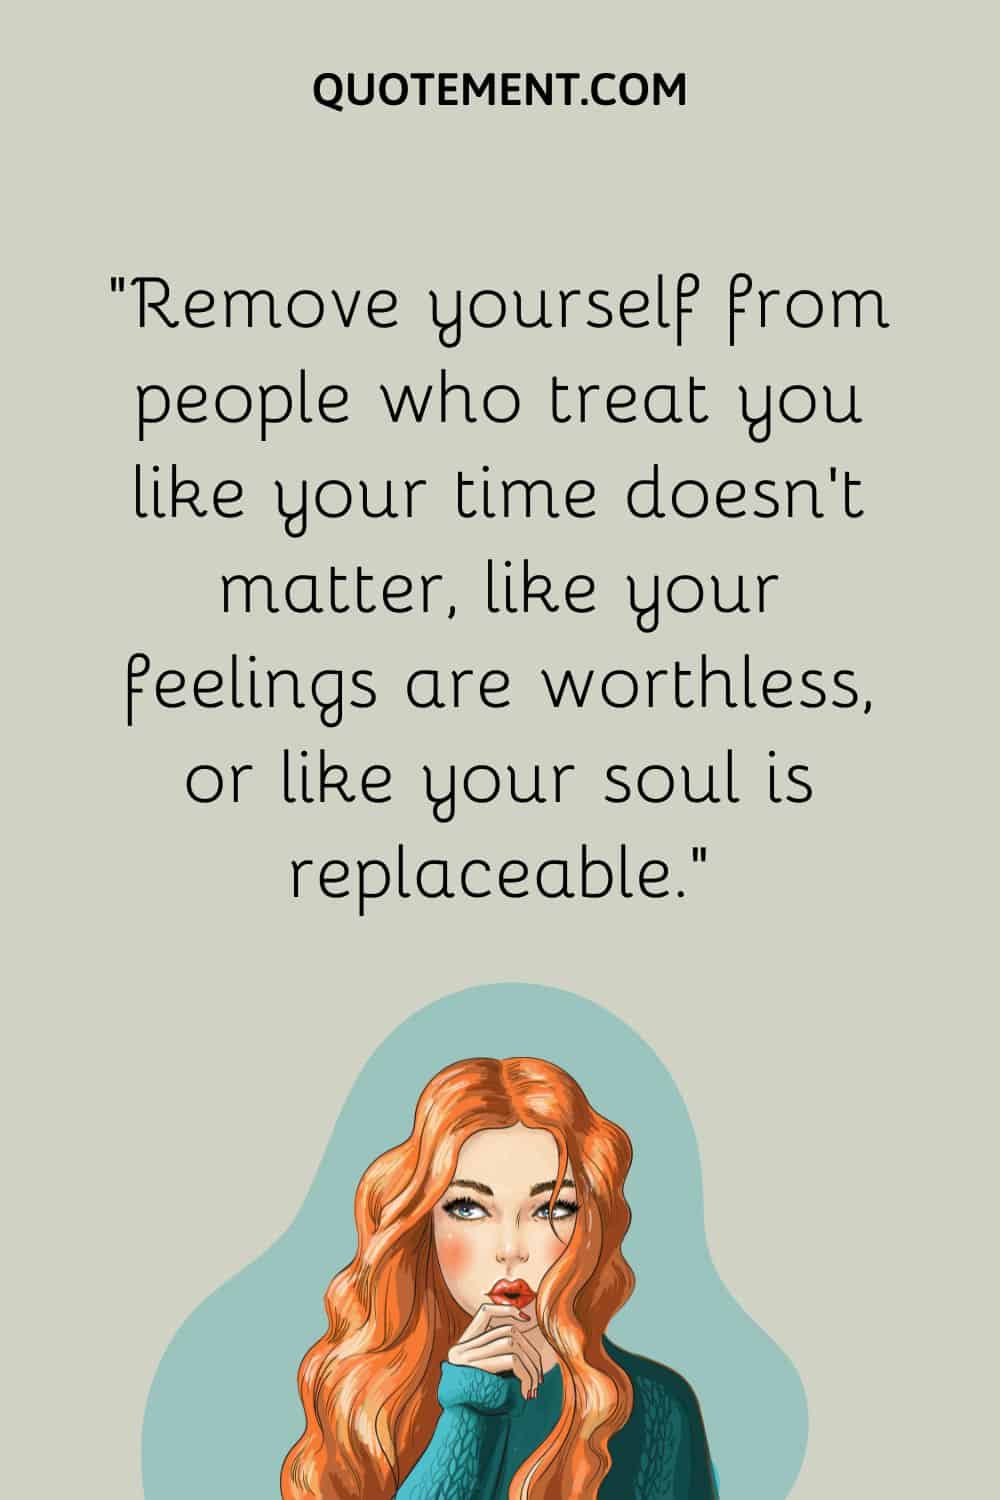 Remove yourself from people who treat you like your time doesn’t matter